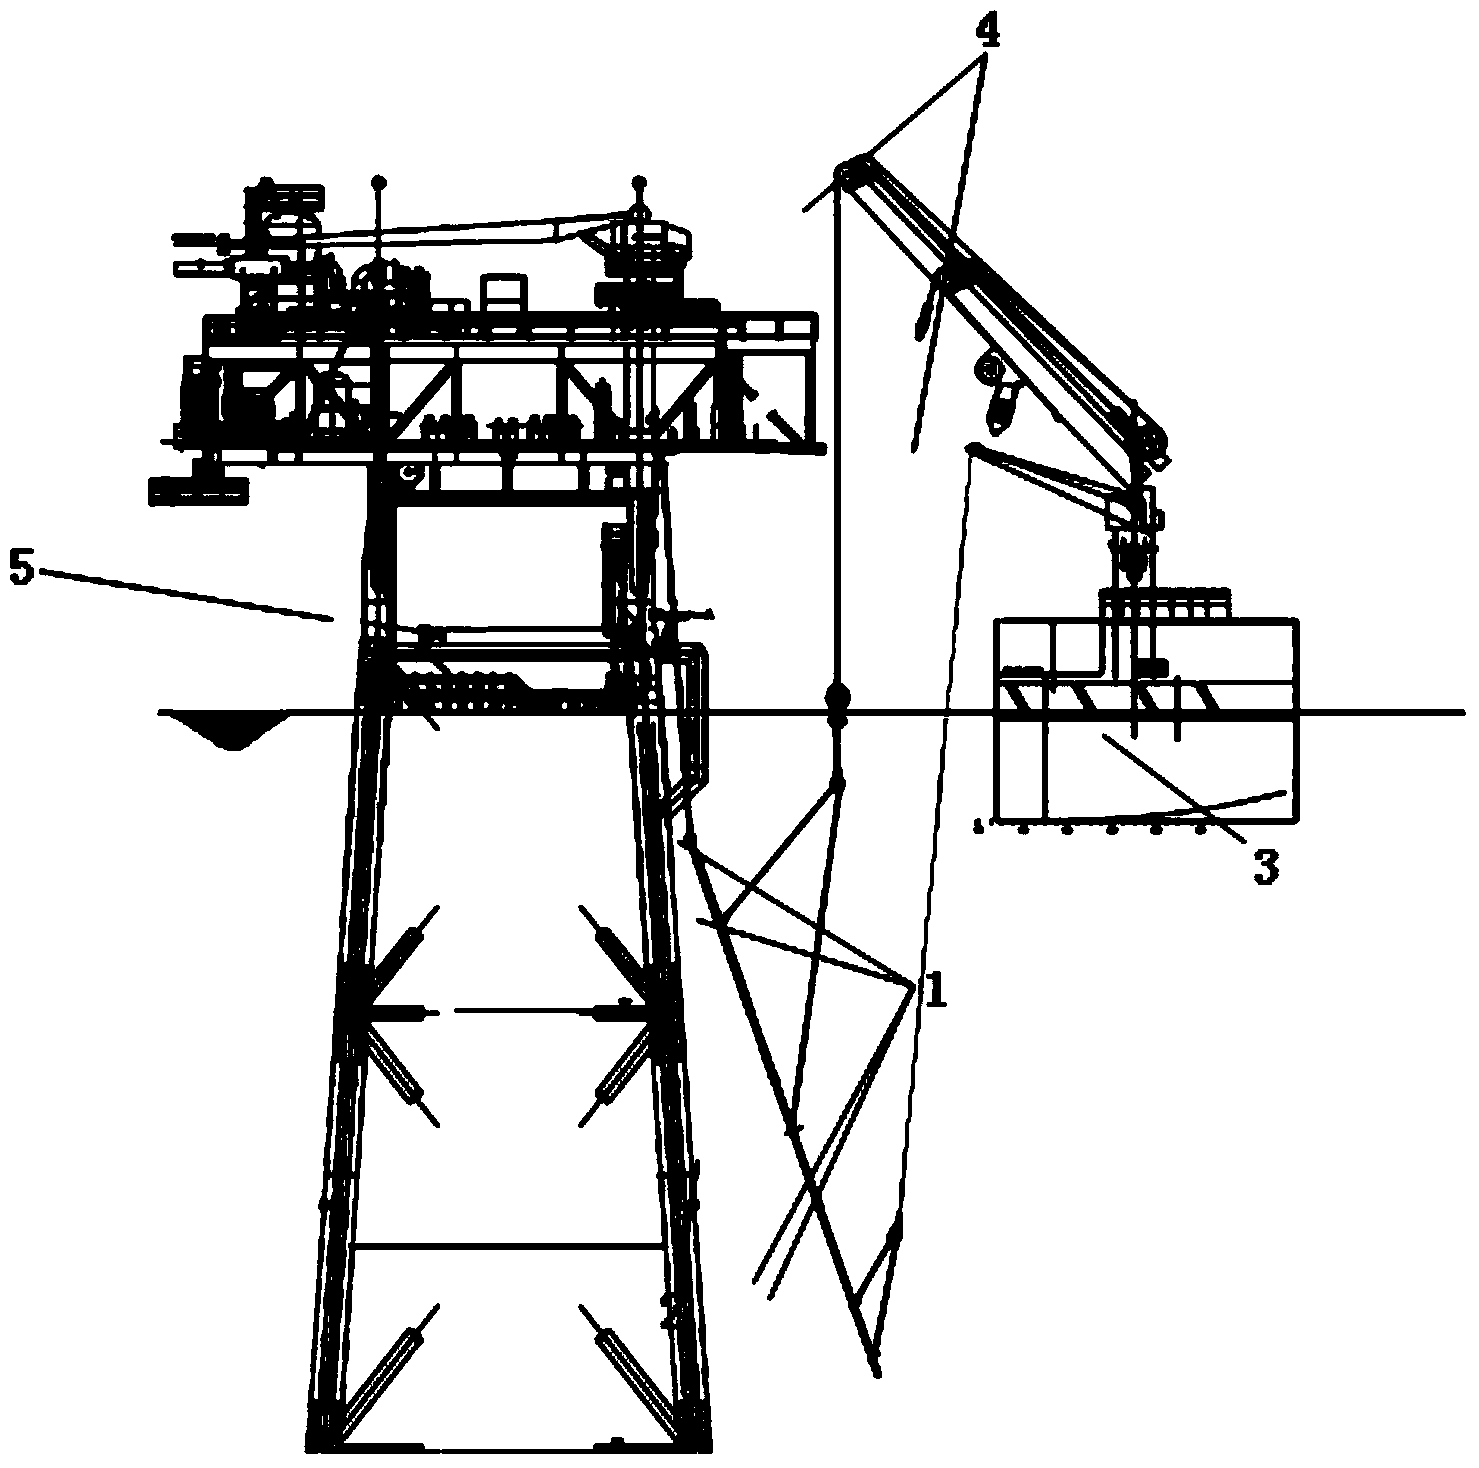 Method for utilizing two cranes on saturation diving support vessel to mount vertical pipe